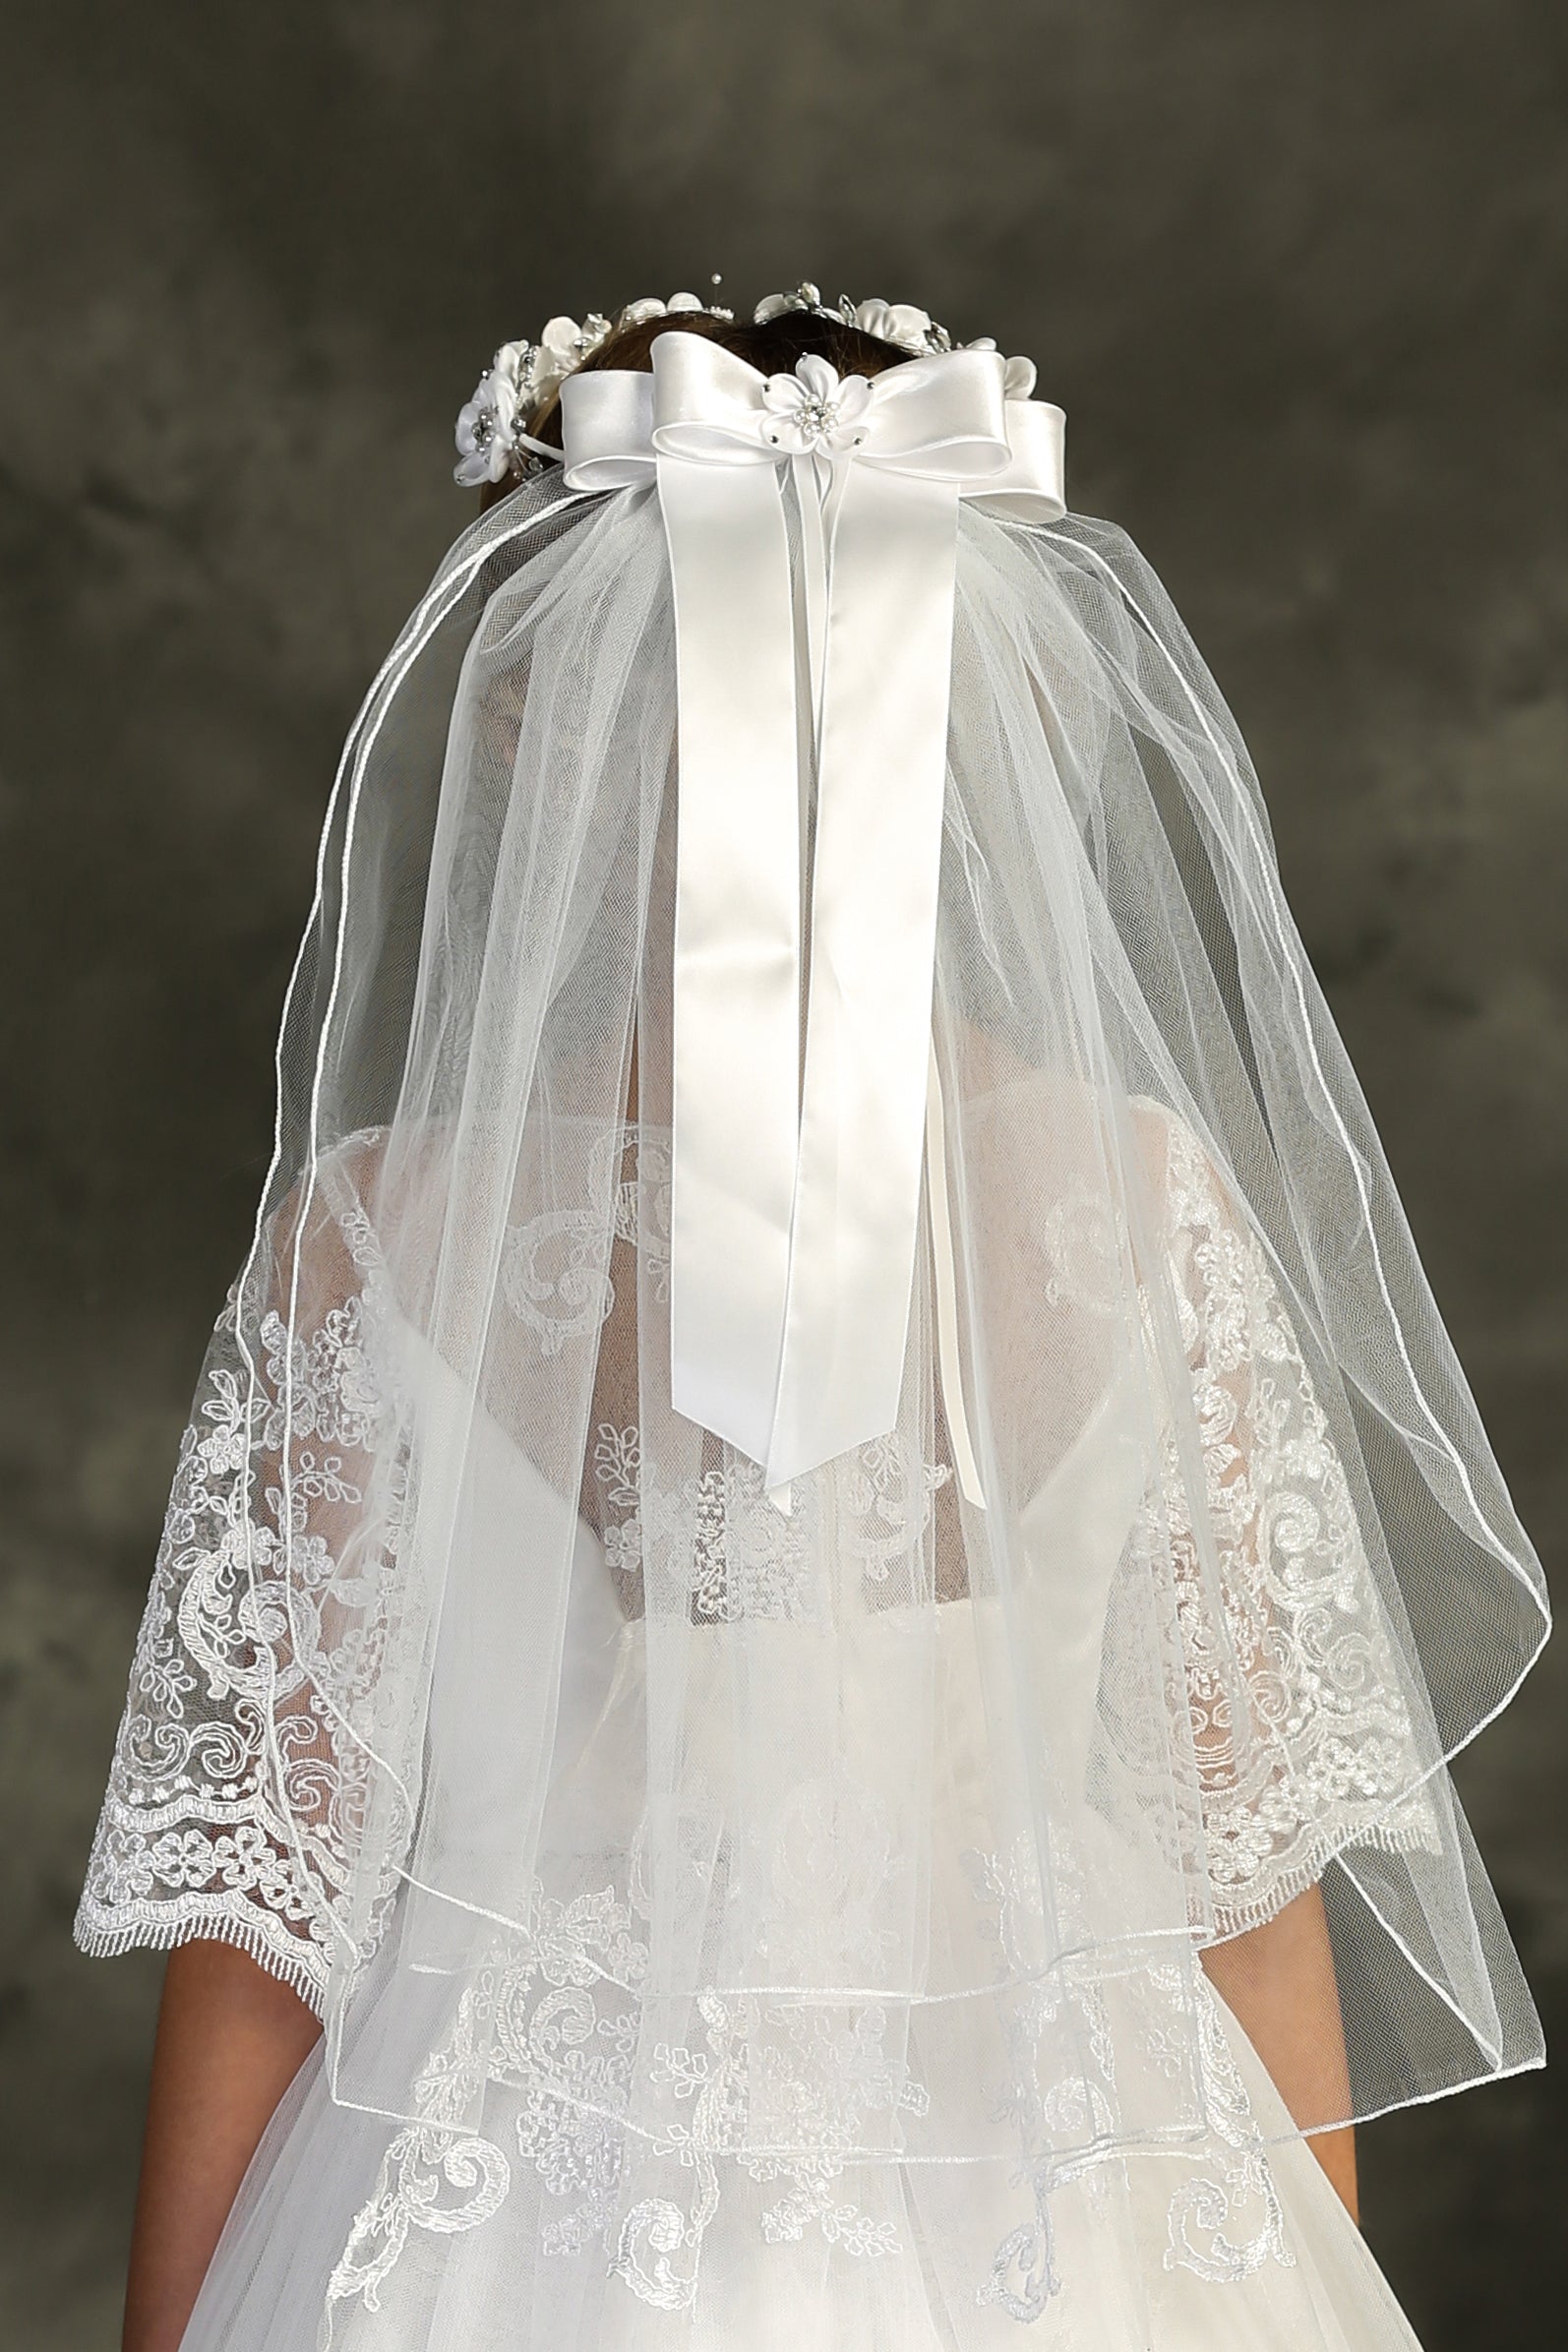 Communion Veil with Pearls Comb First Holy Communion Outfit, with Pearls +$5 / White